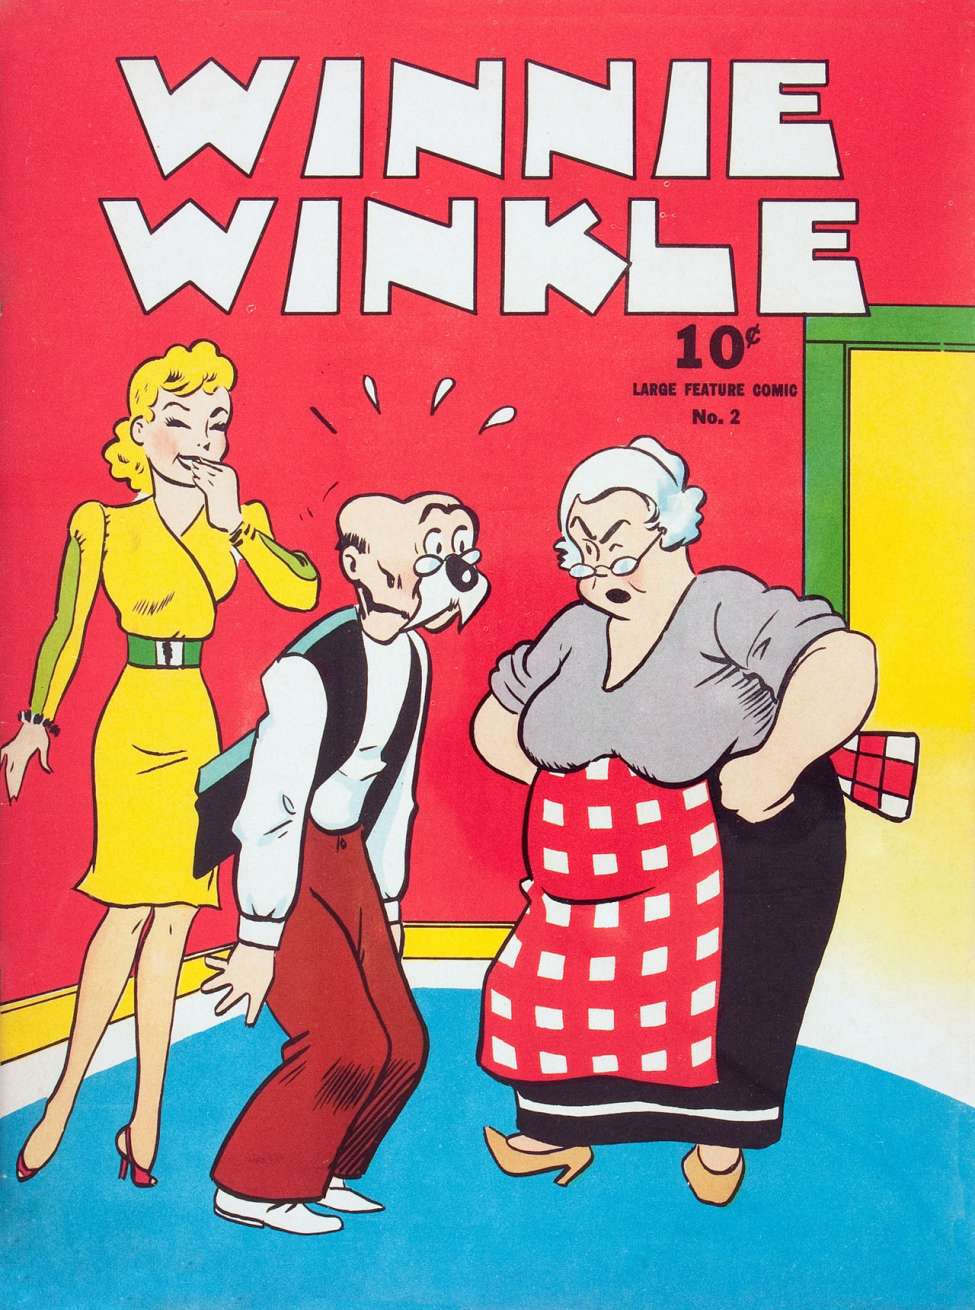 Book Cover For Large Feature Comic v2 2 - Winnie Winkle